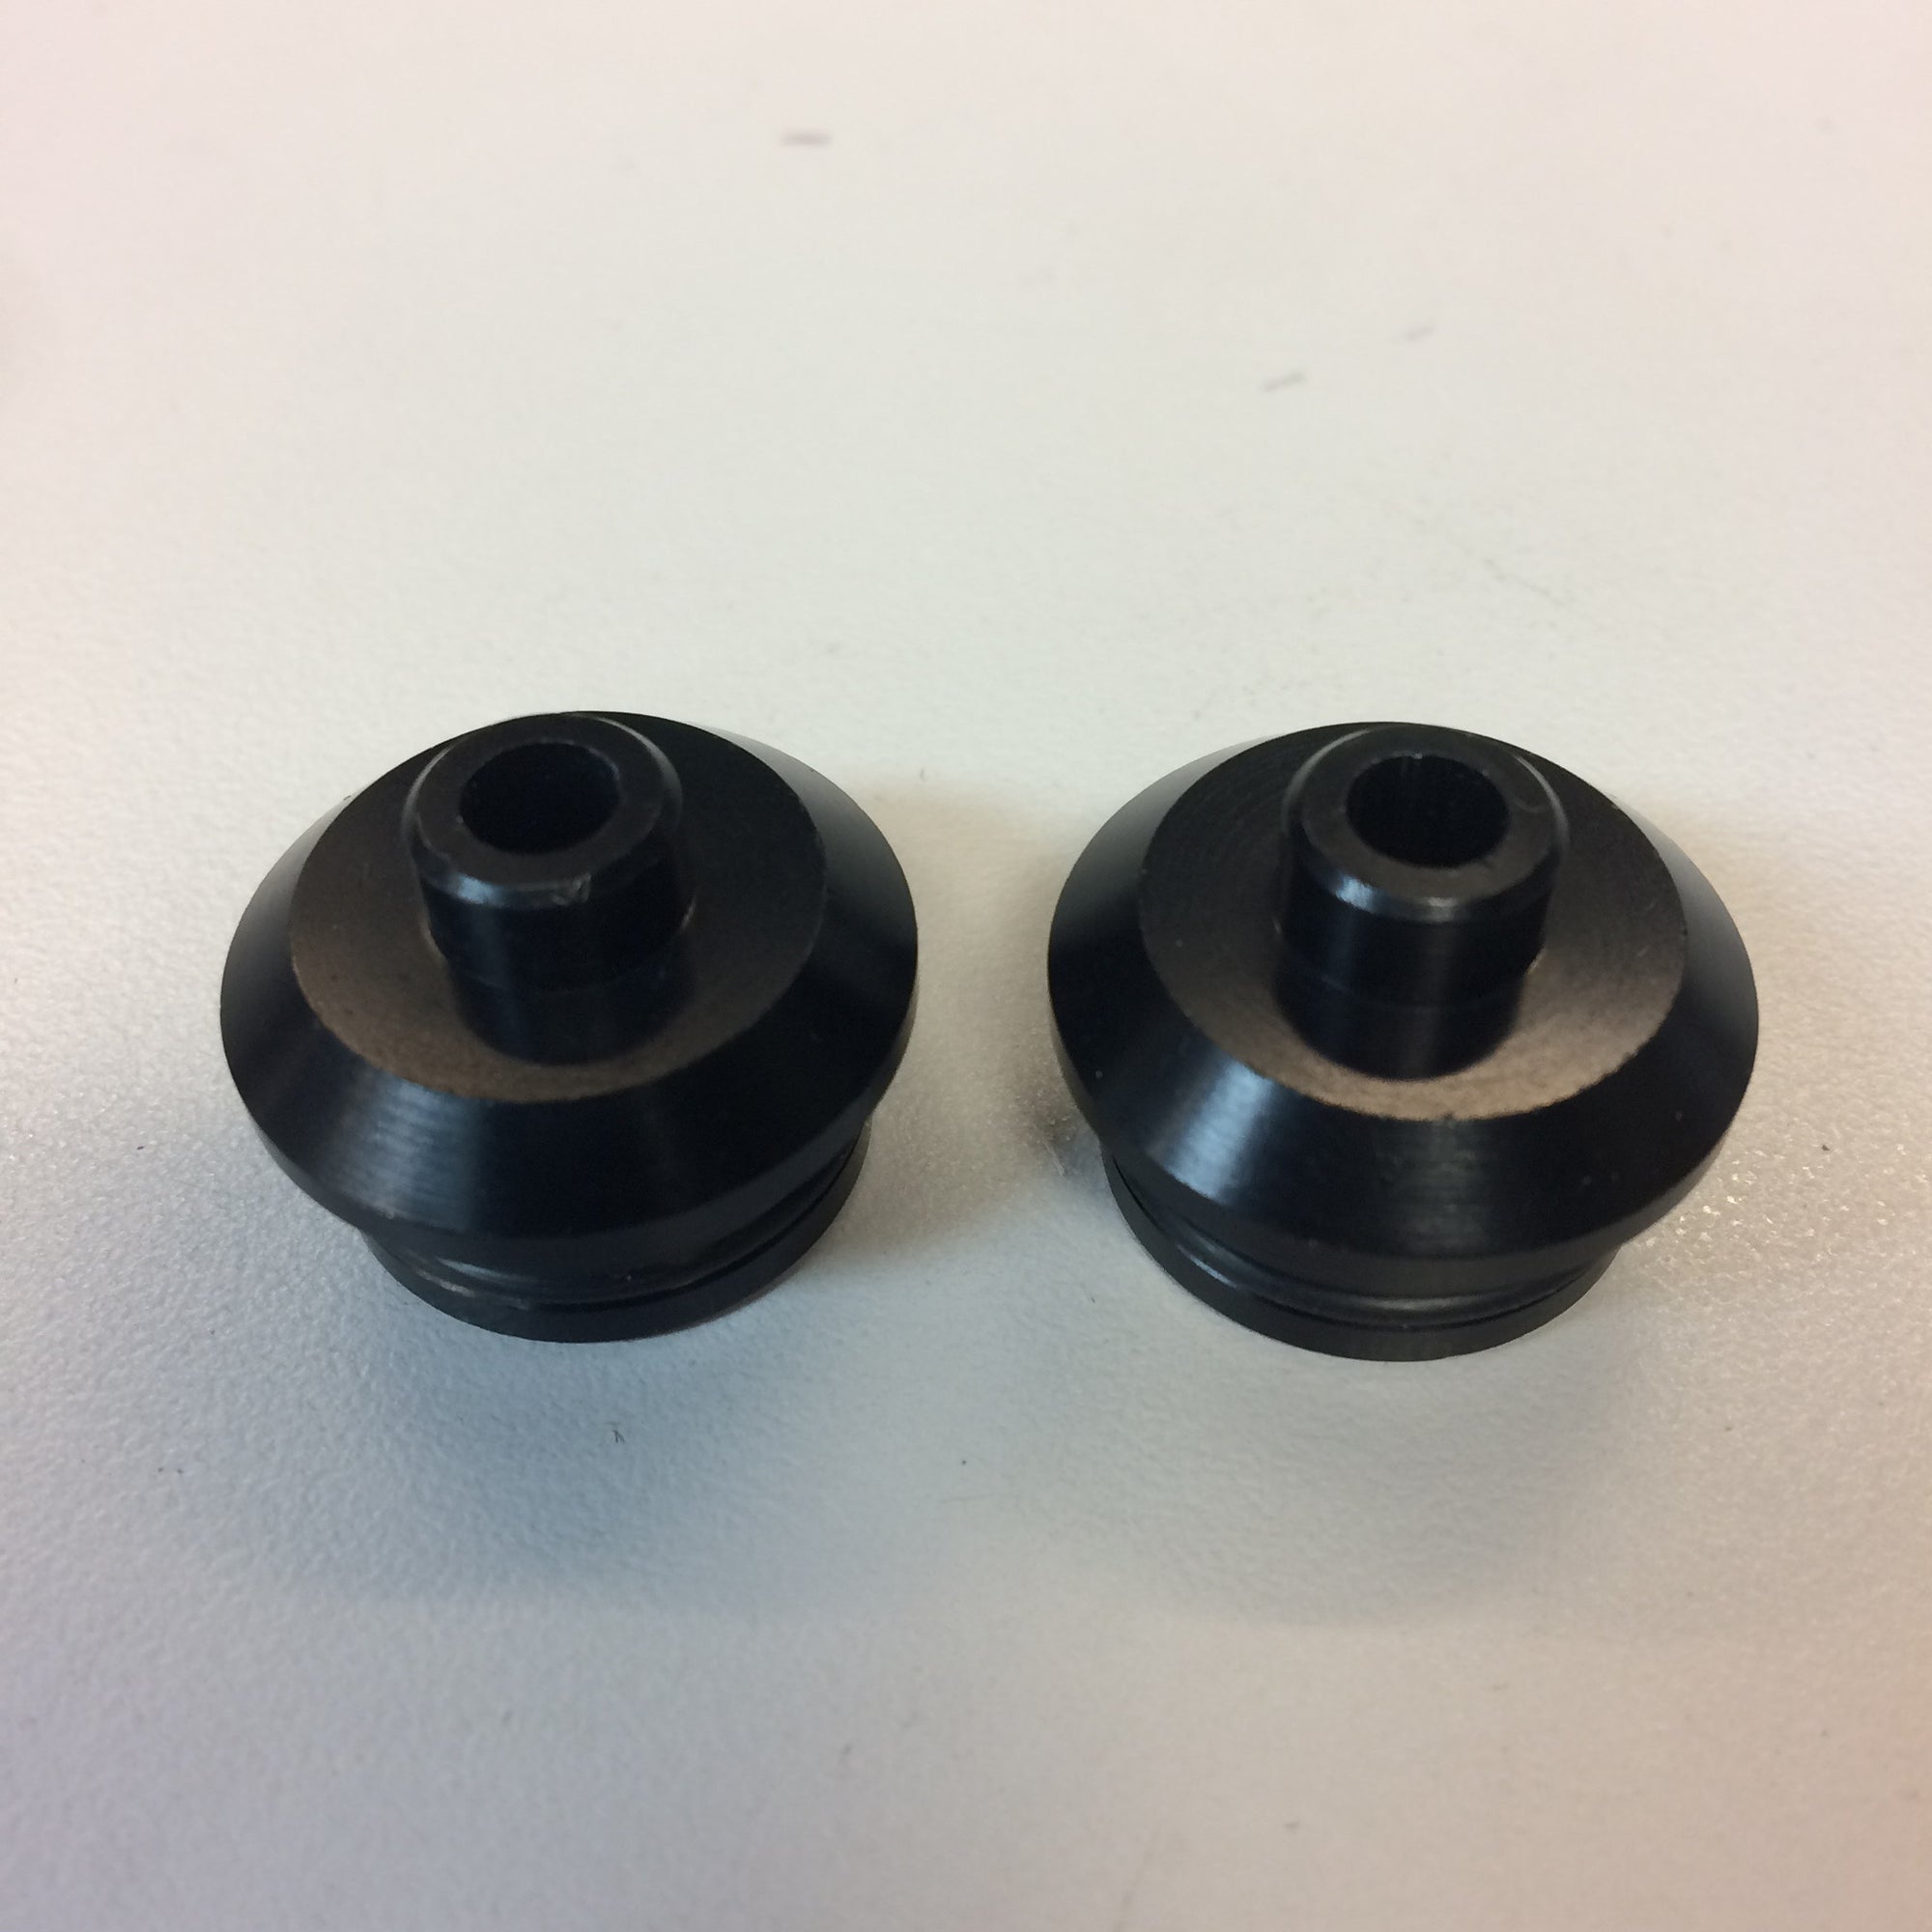 Mavic Front Axle Adapters 20x110mm to 9x100mm - 99503901